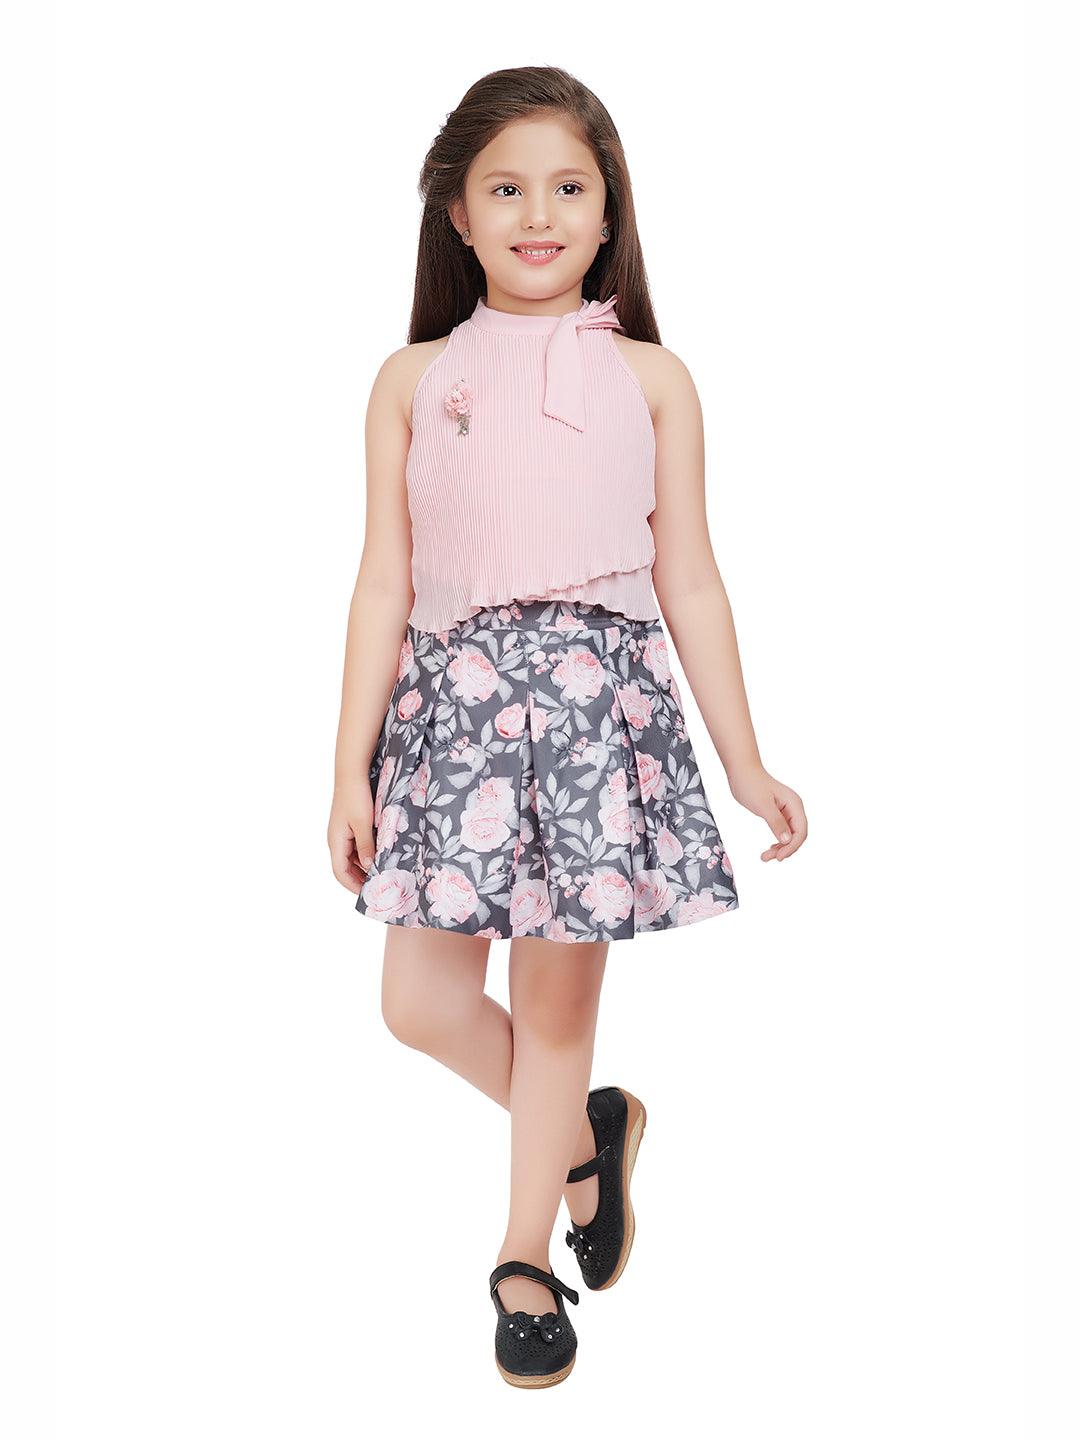 Stylish 2 Piece Cotton Pink Top Skirt For Baby Girls  flybuyin